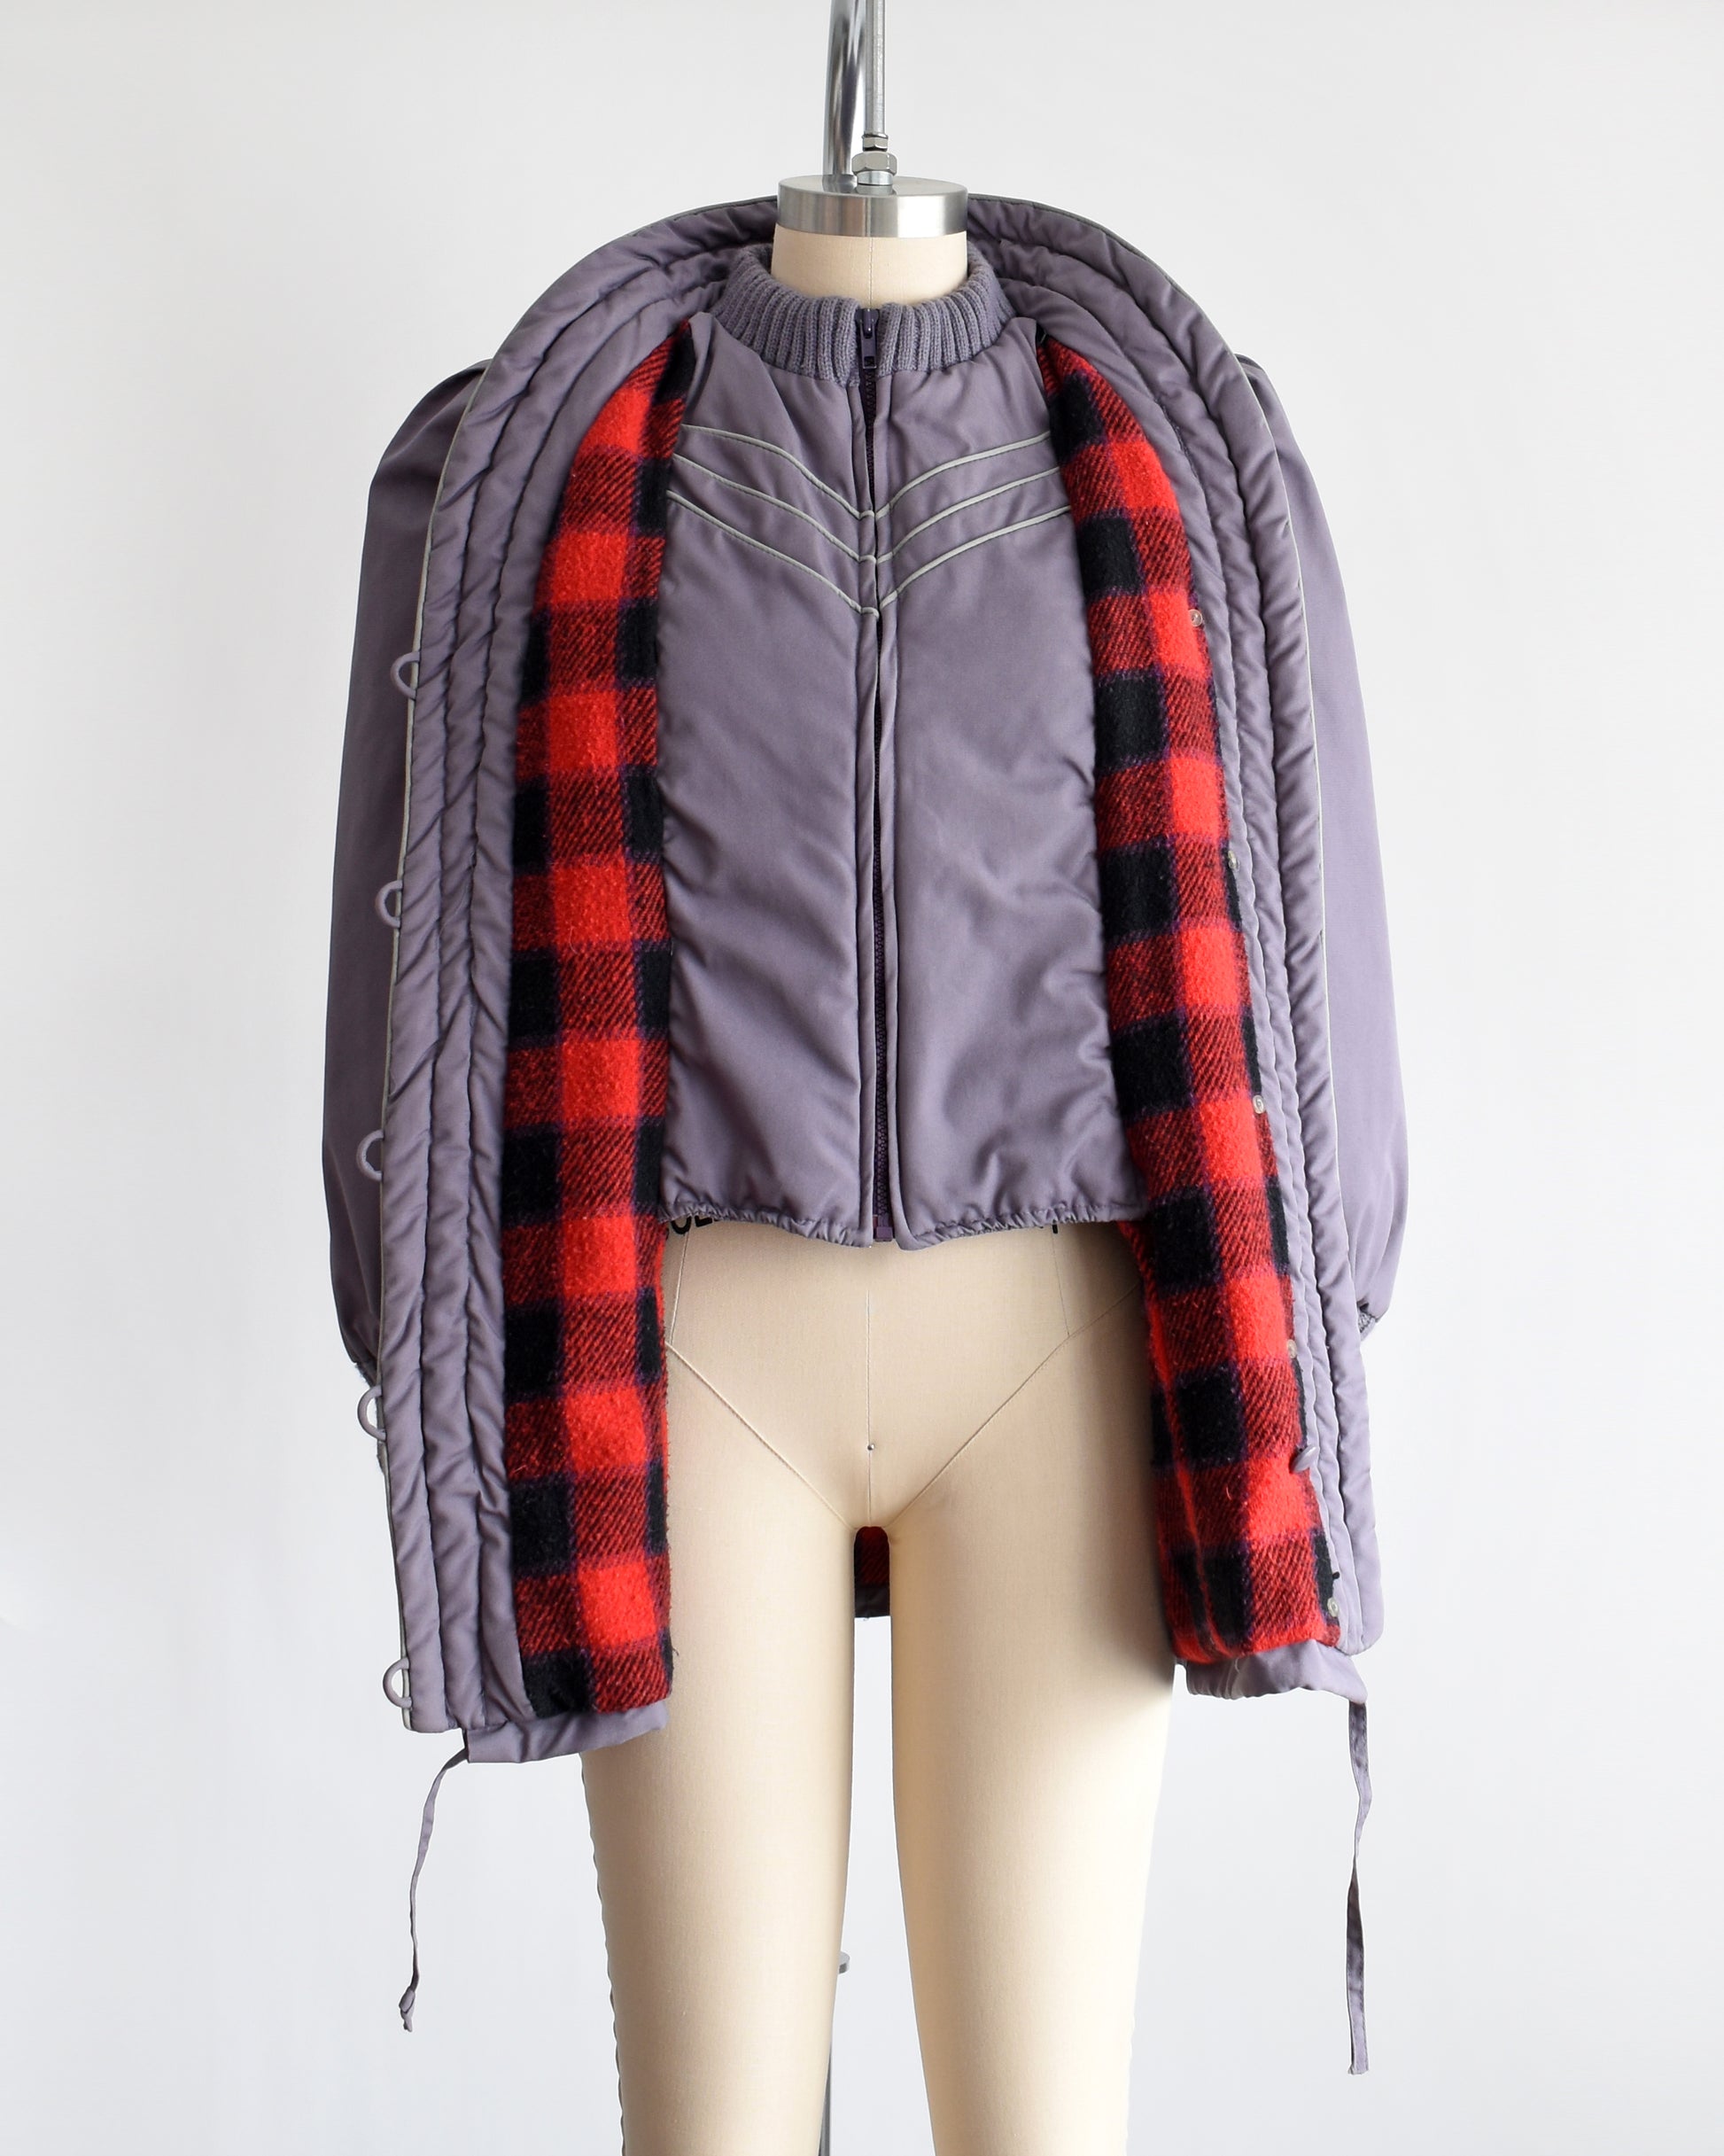  a vintage 1980s purple puffy coat with shawl style collar with gray trim. The coat is opened showing the plaid lining and built in vest